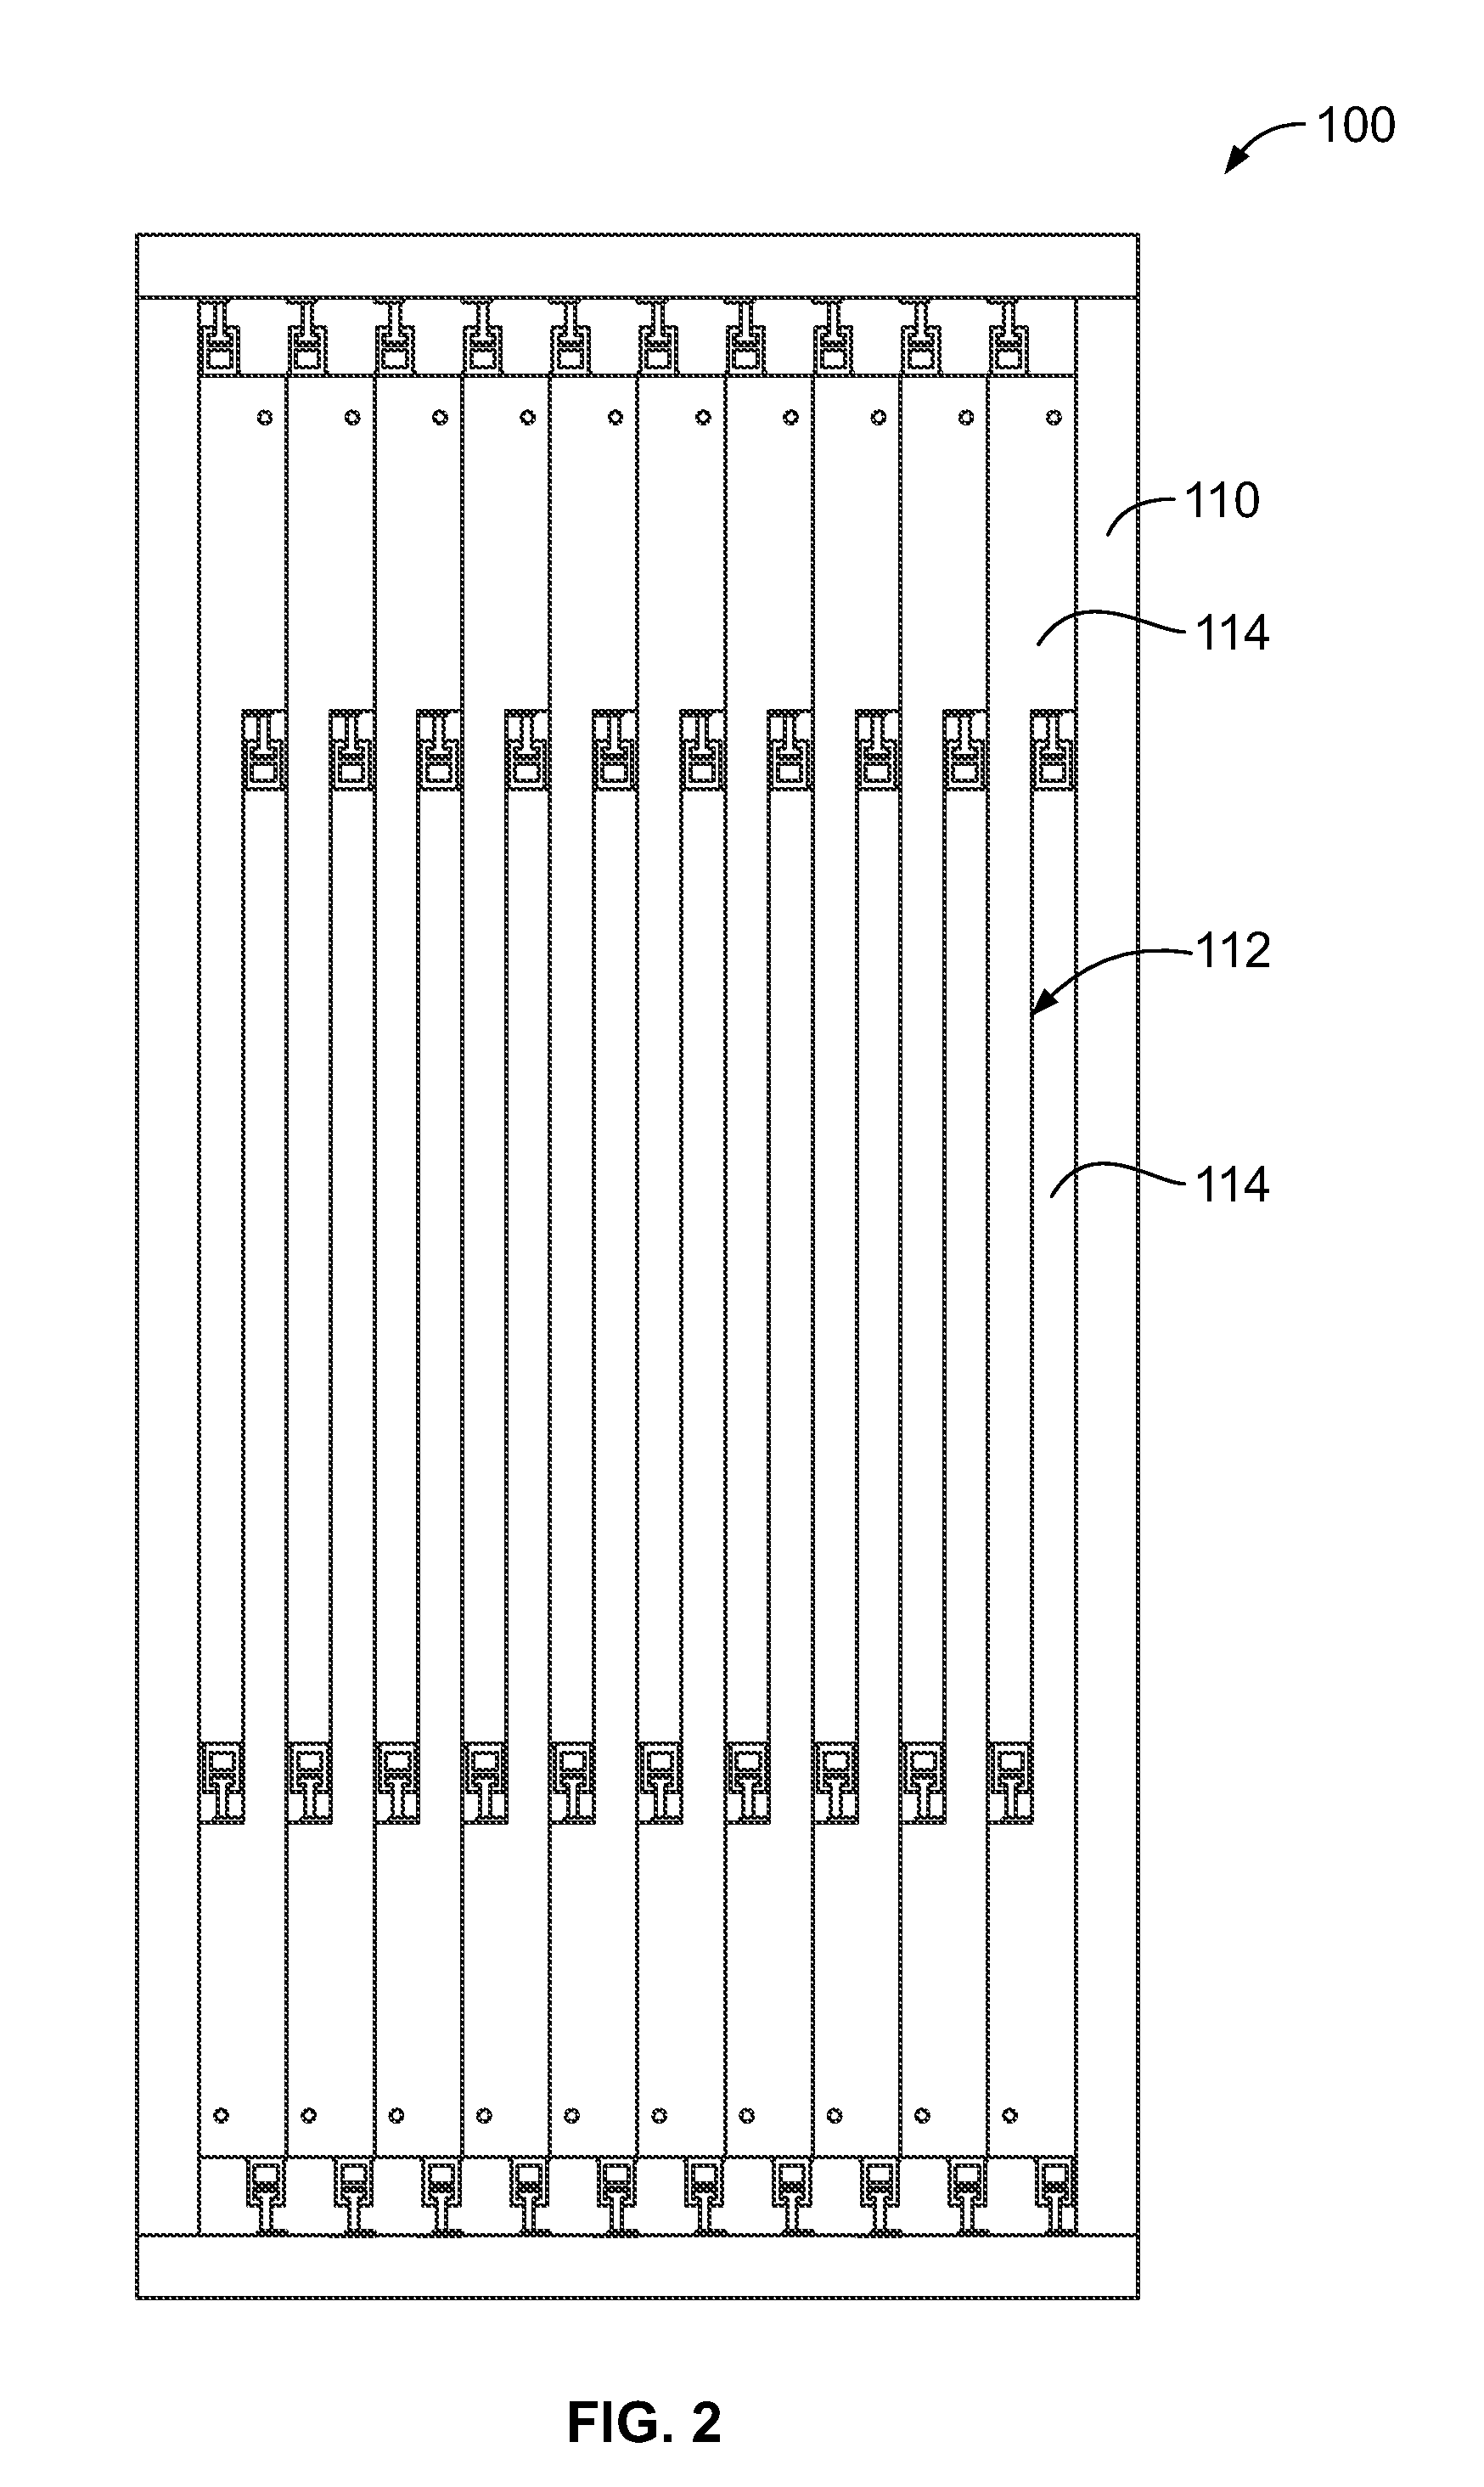 Cabled backplane system having an electromagnetic radiation absorber